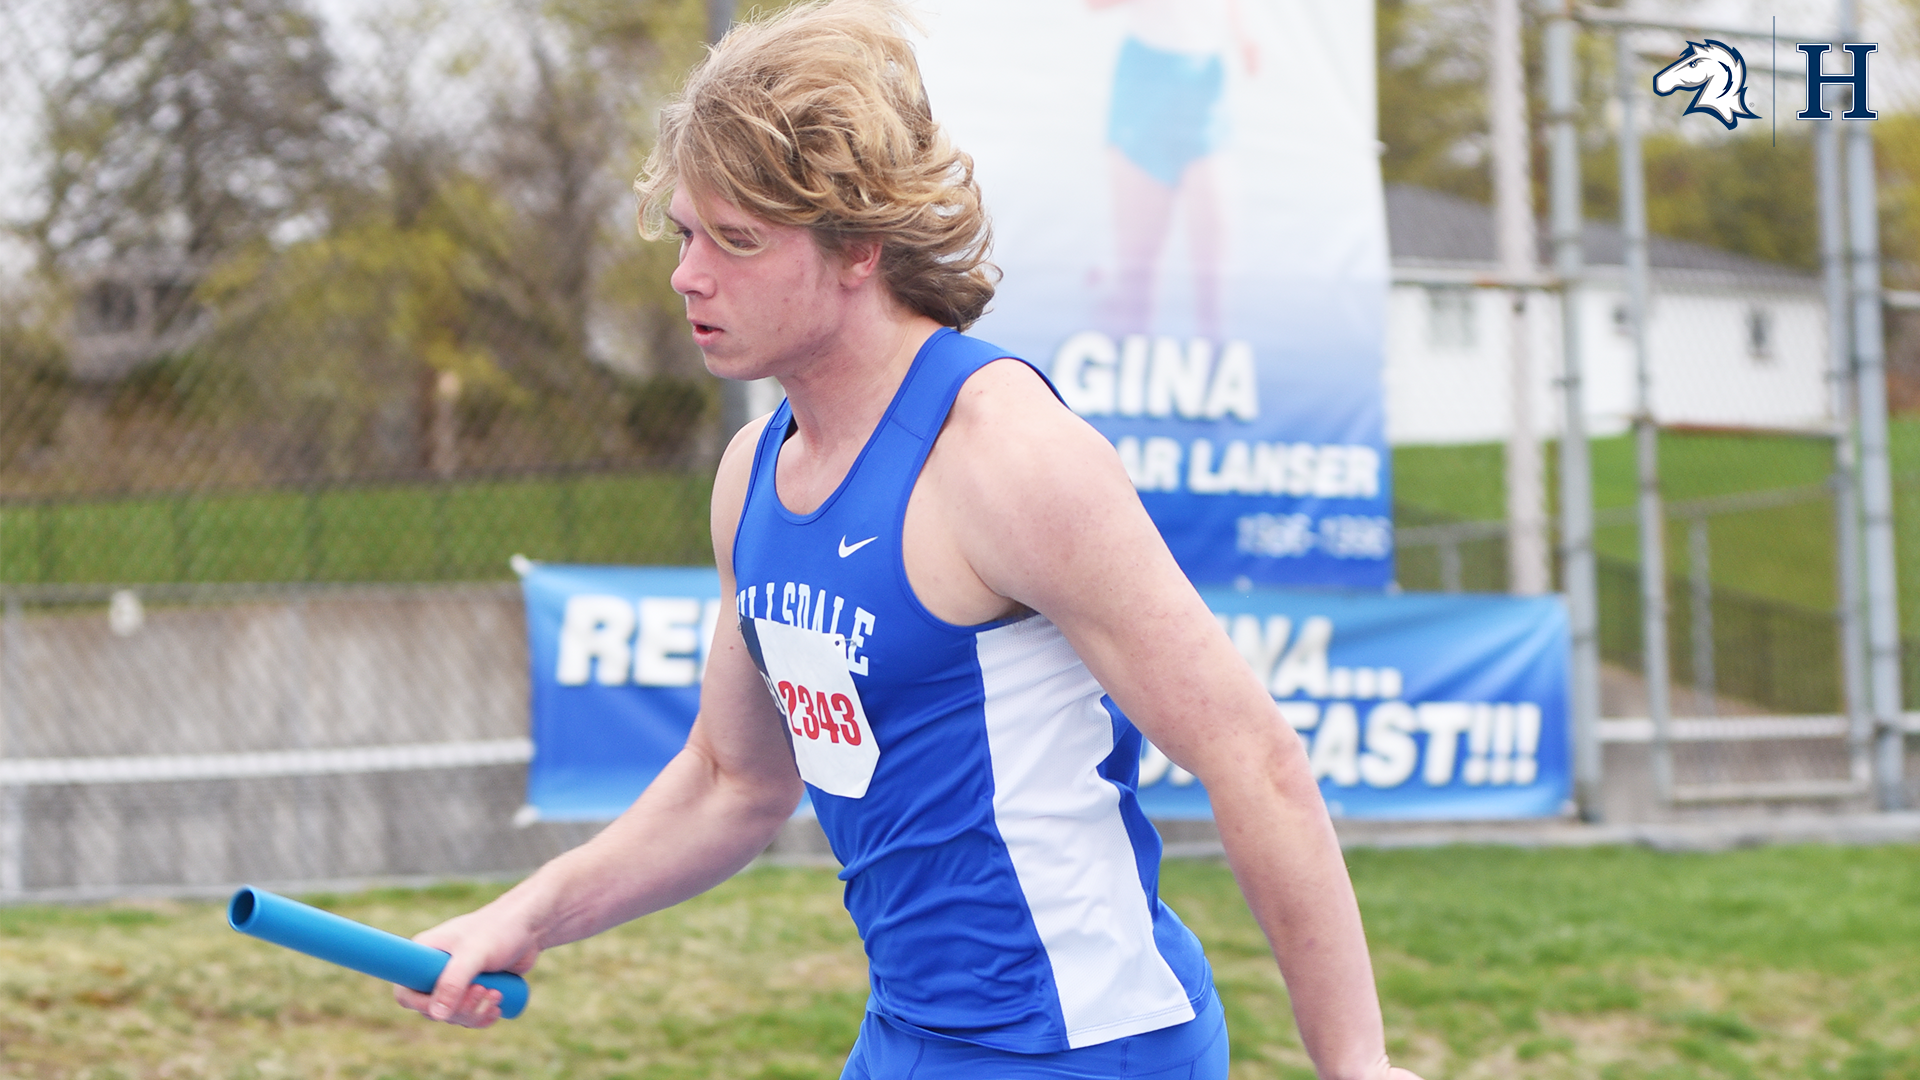 Preview: Hillsdale College welcomes 46 schools, elite runners to 54th Annual GINA Relays